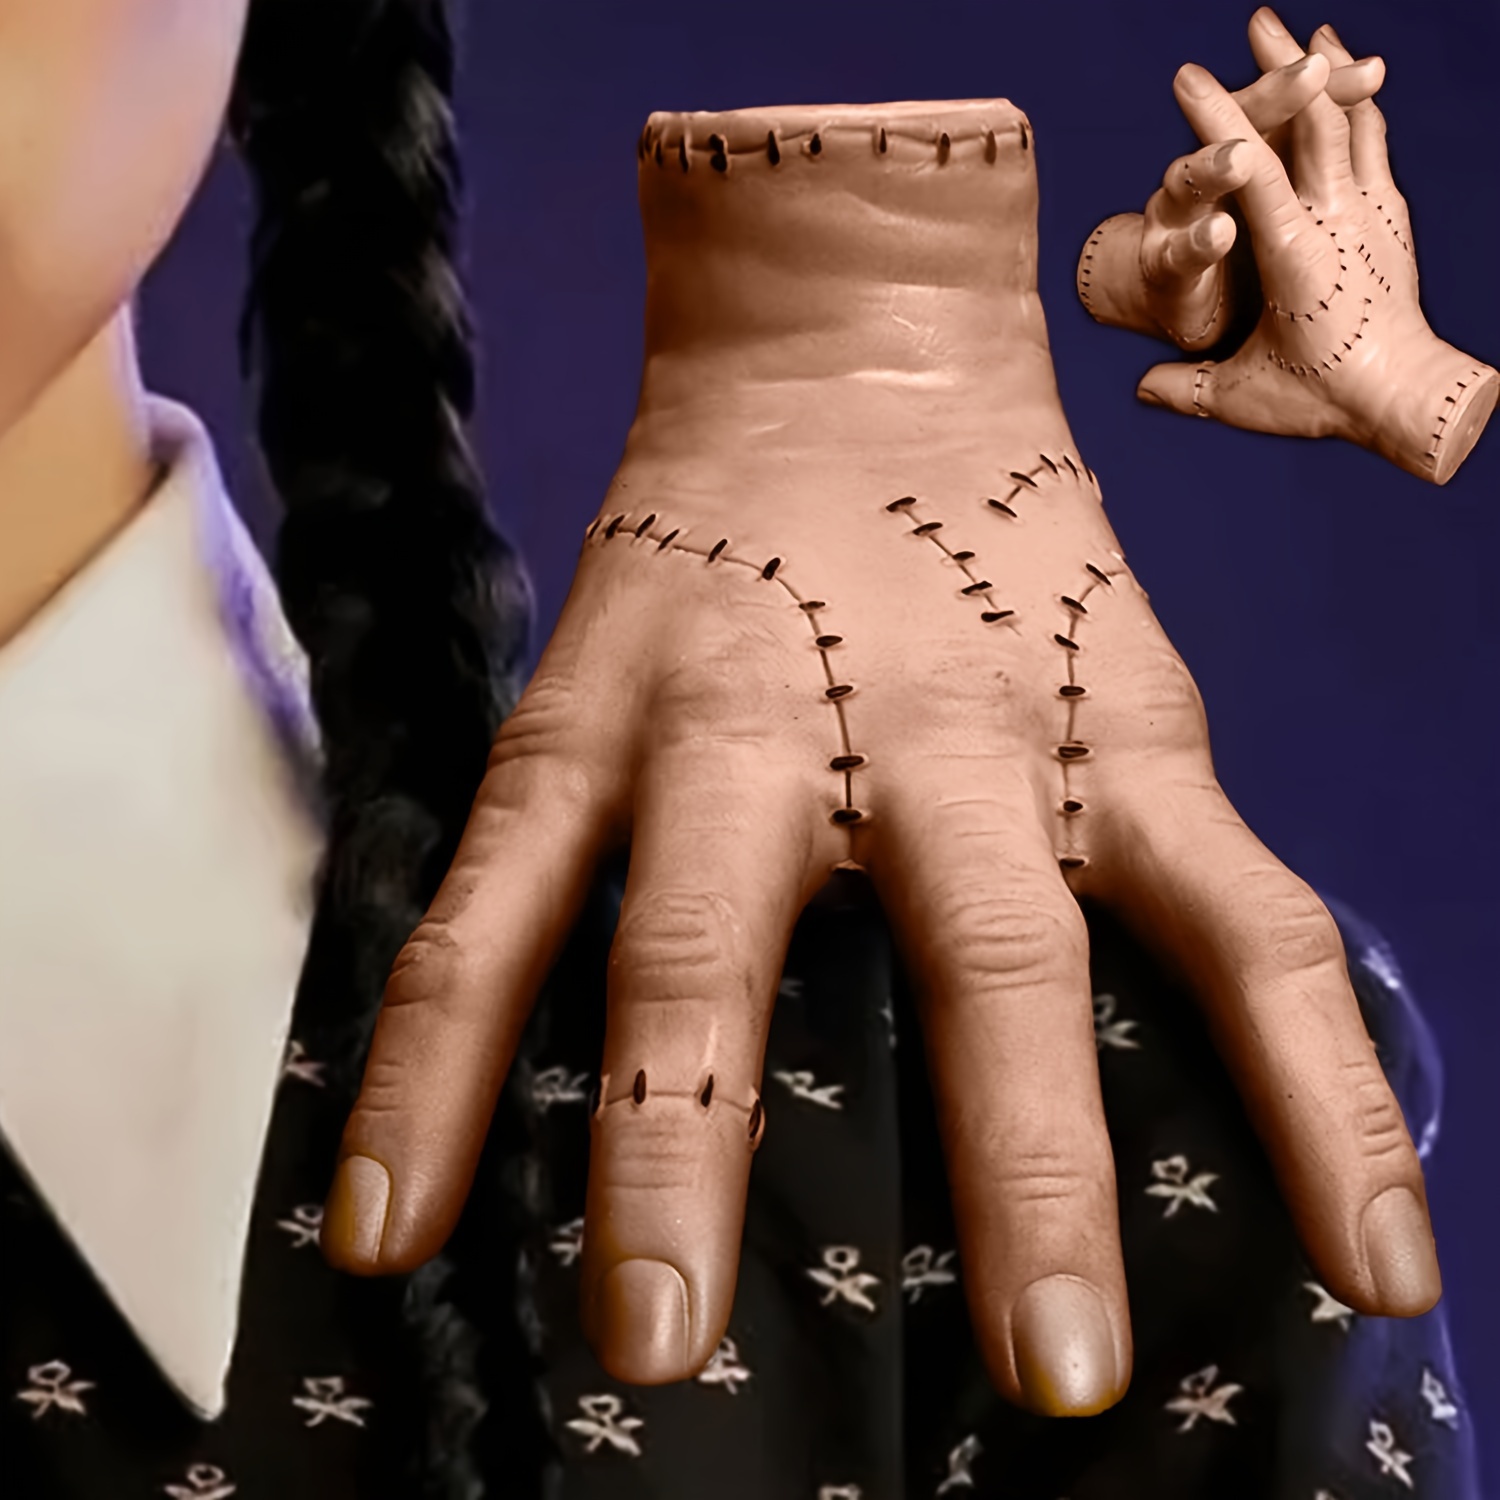 Wednesday Addams Thing Hand Action Figure Anime Gothic Wednesday Addams  Family Thing Figure Hand Model